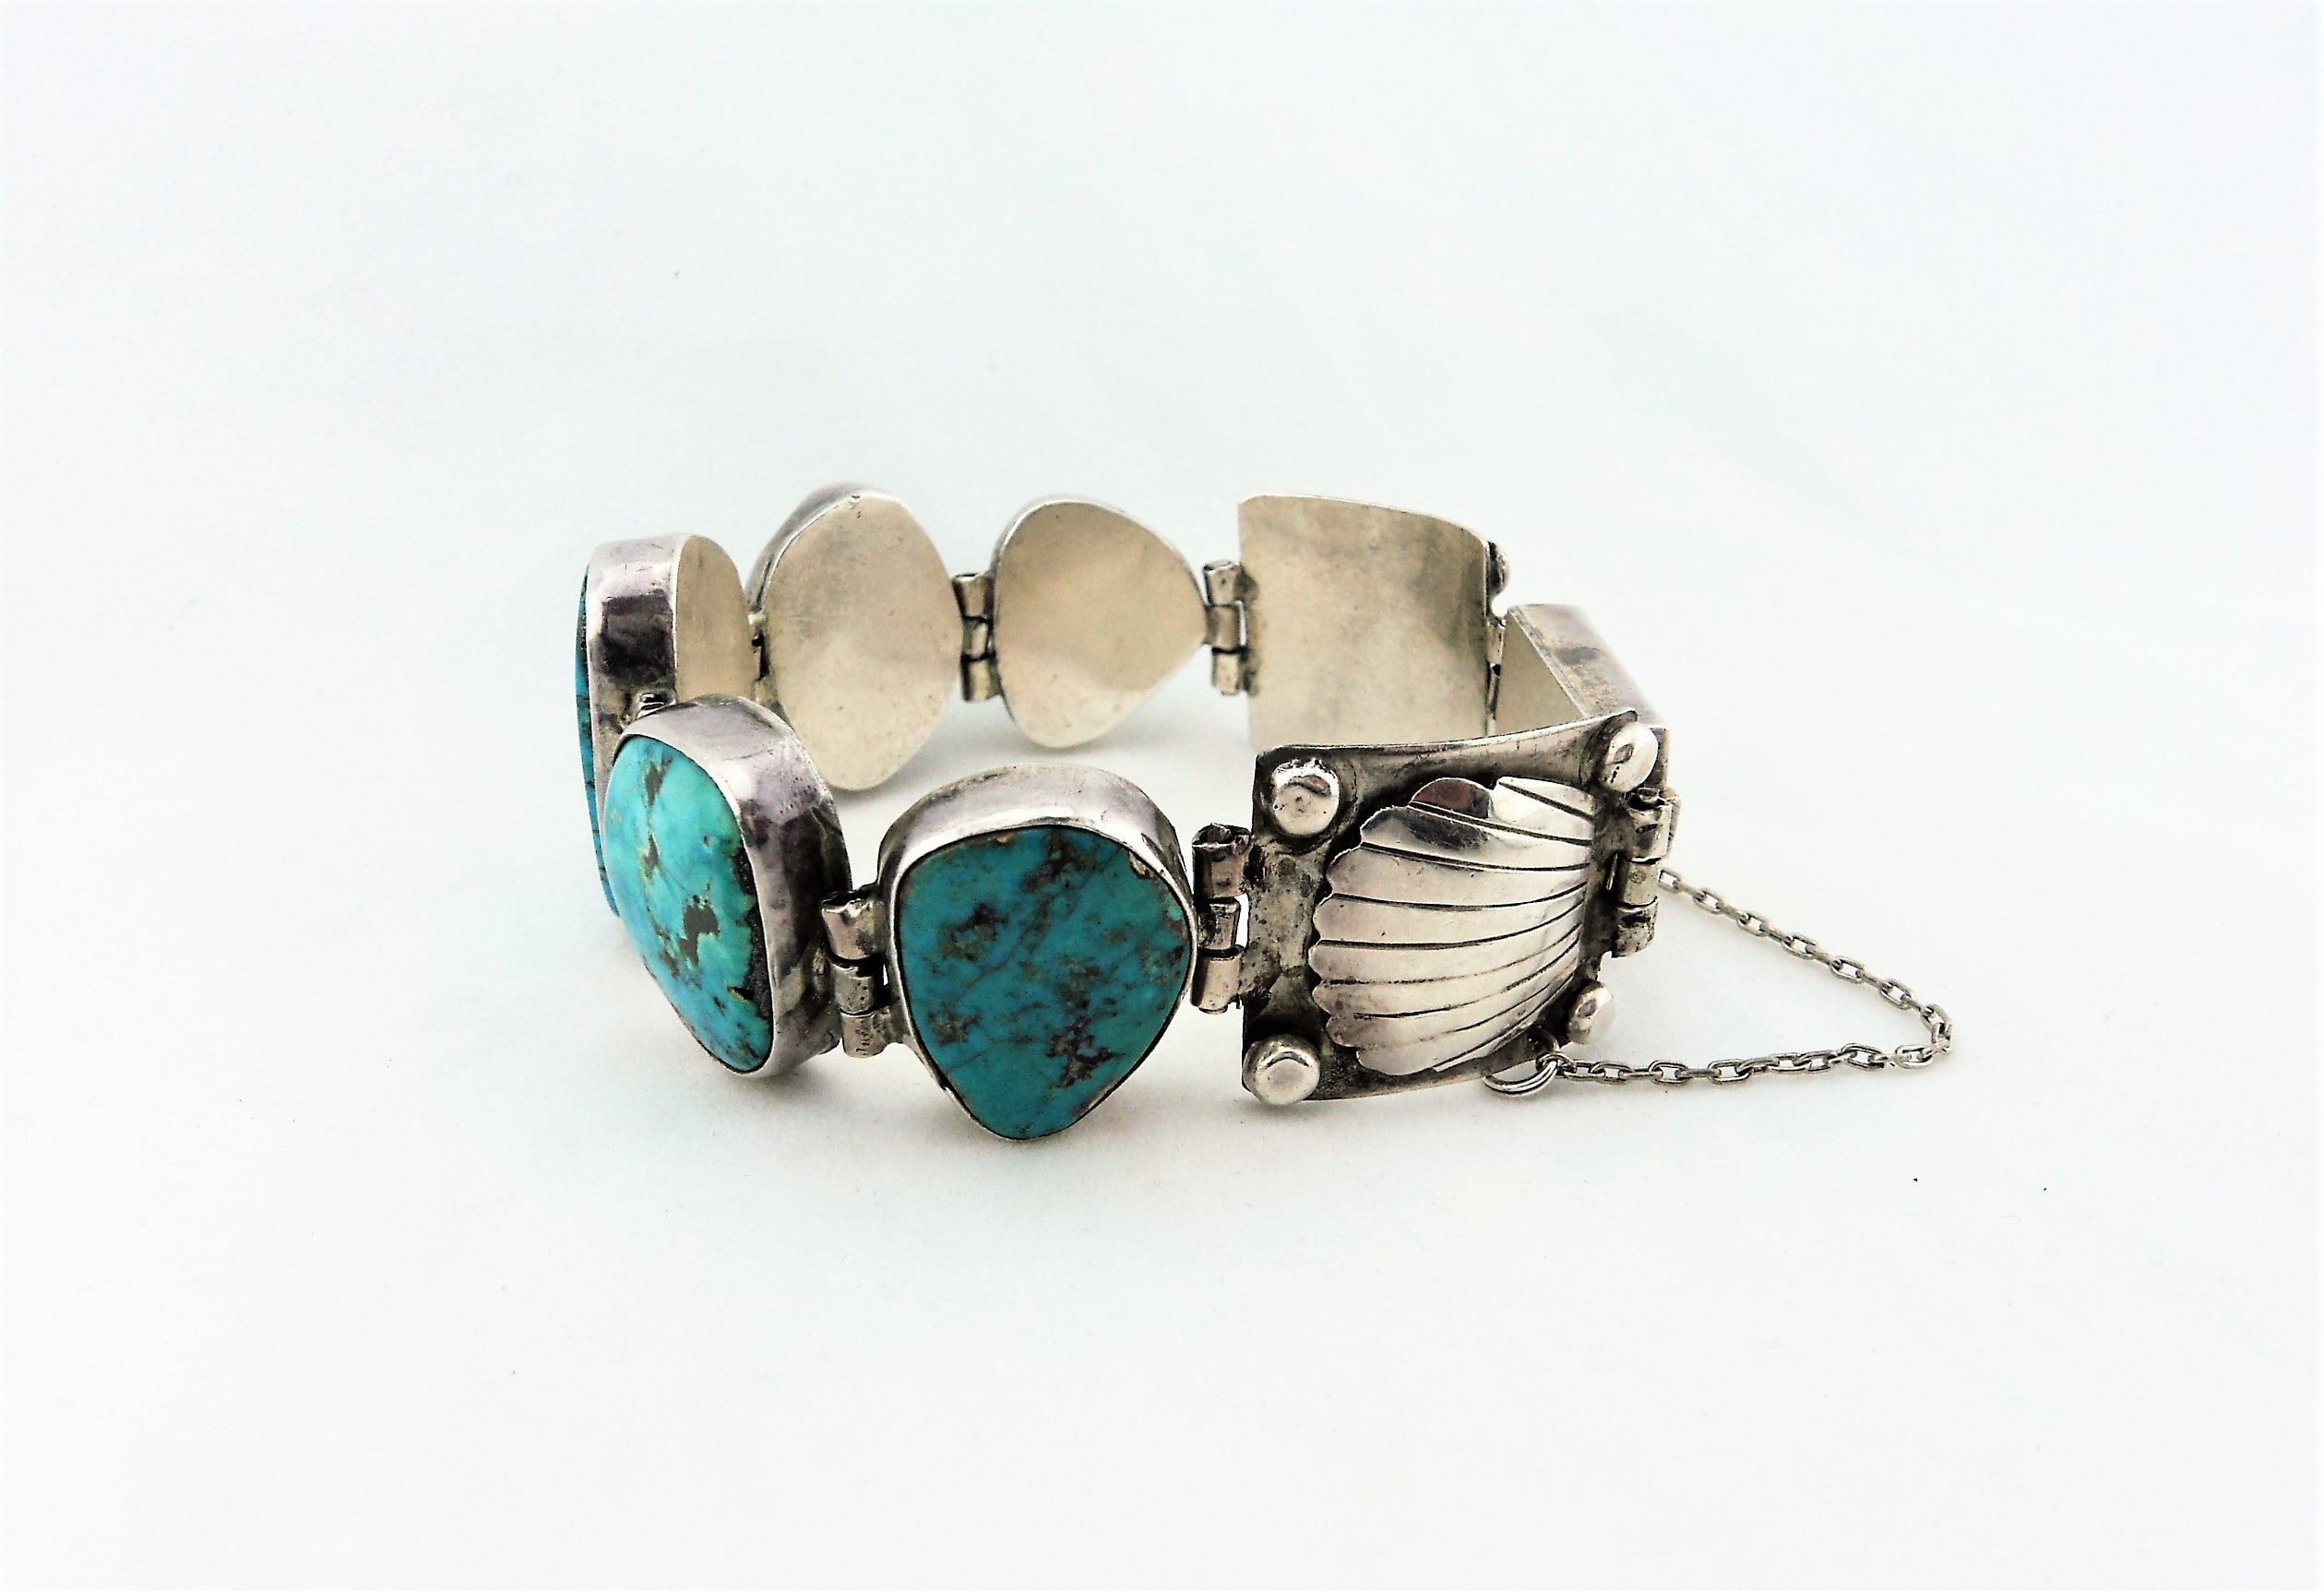 Native American Sterling Silver Turquoise Bracelet